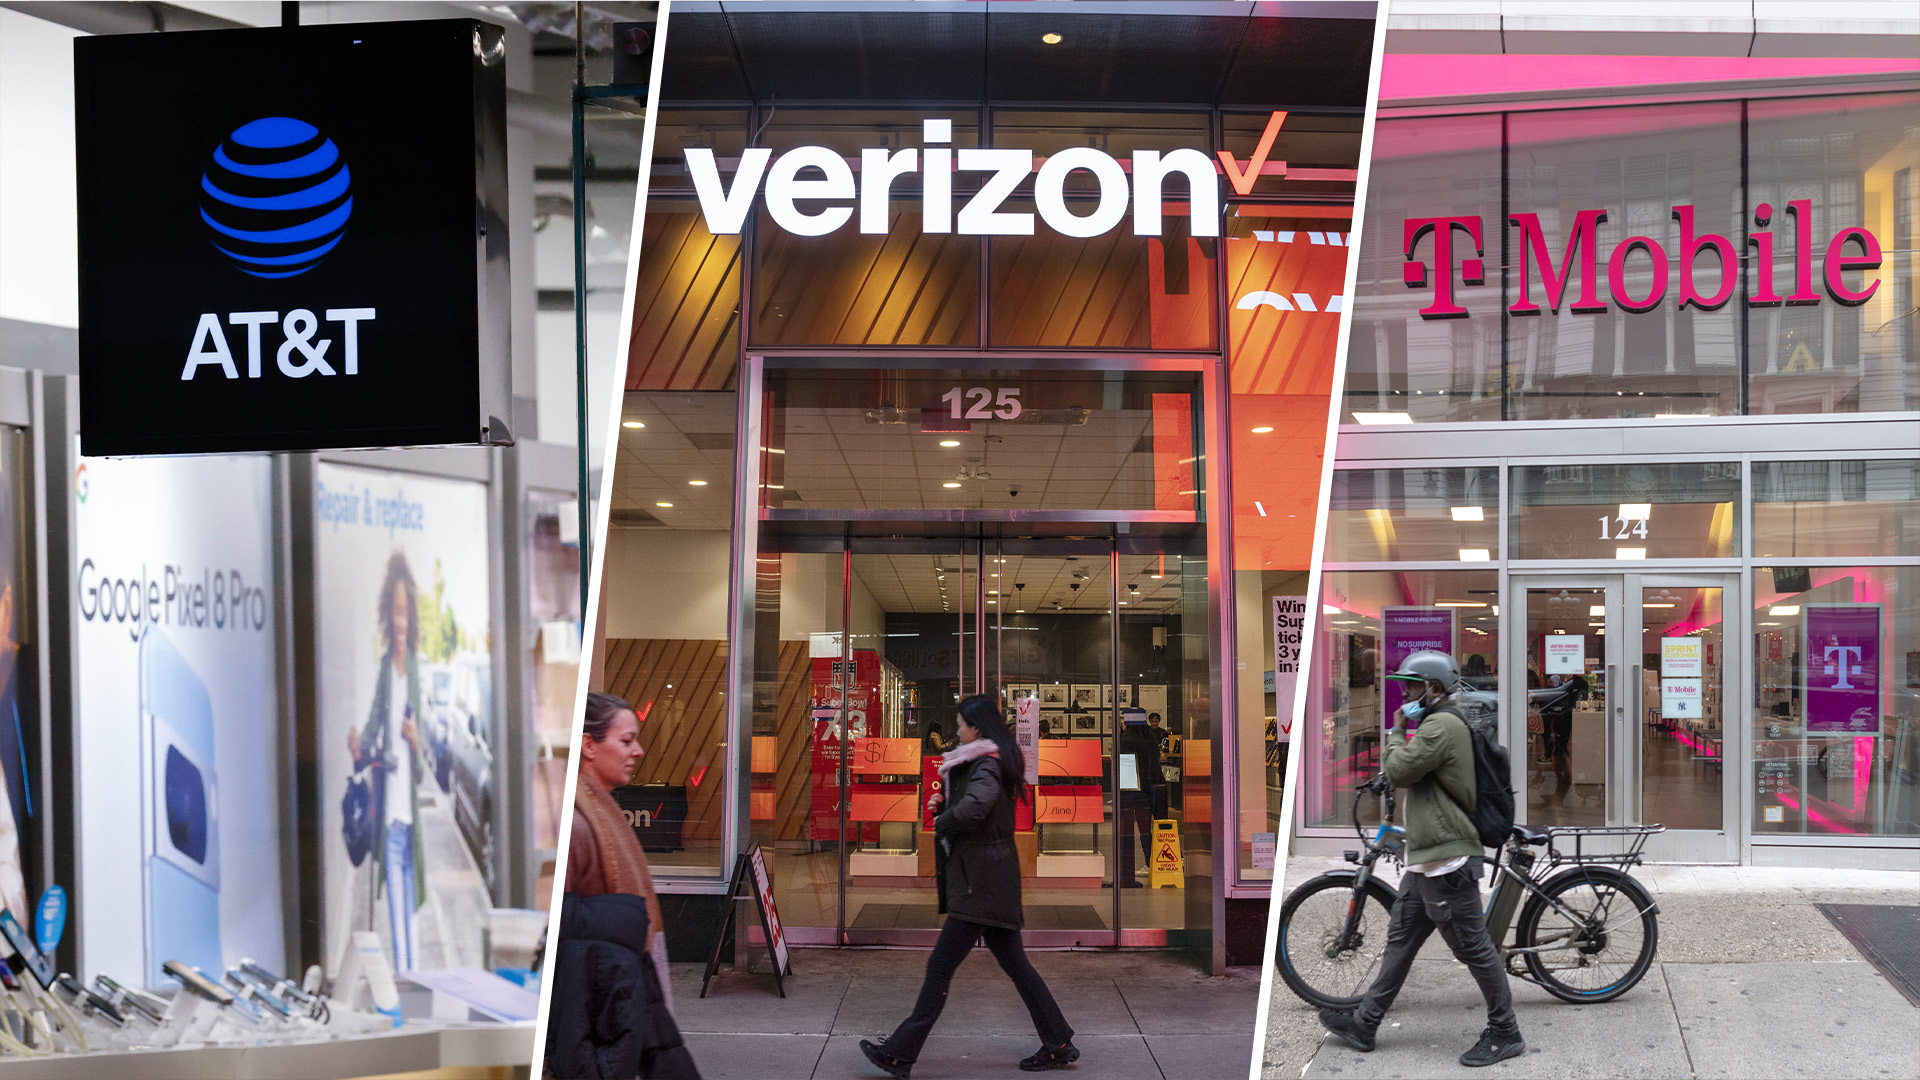 AT&T, Verizon and T-Mobile hit by massive nationwide cell outages